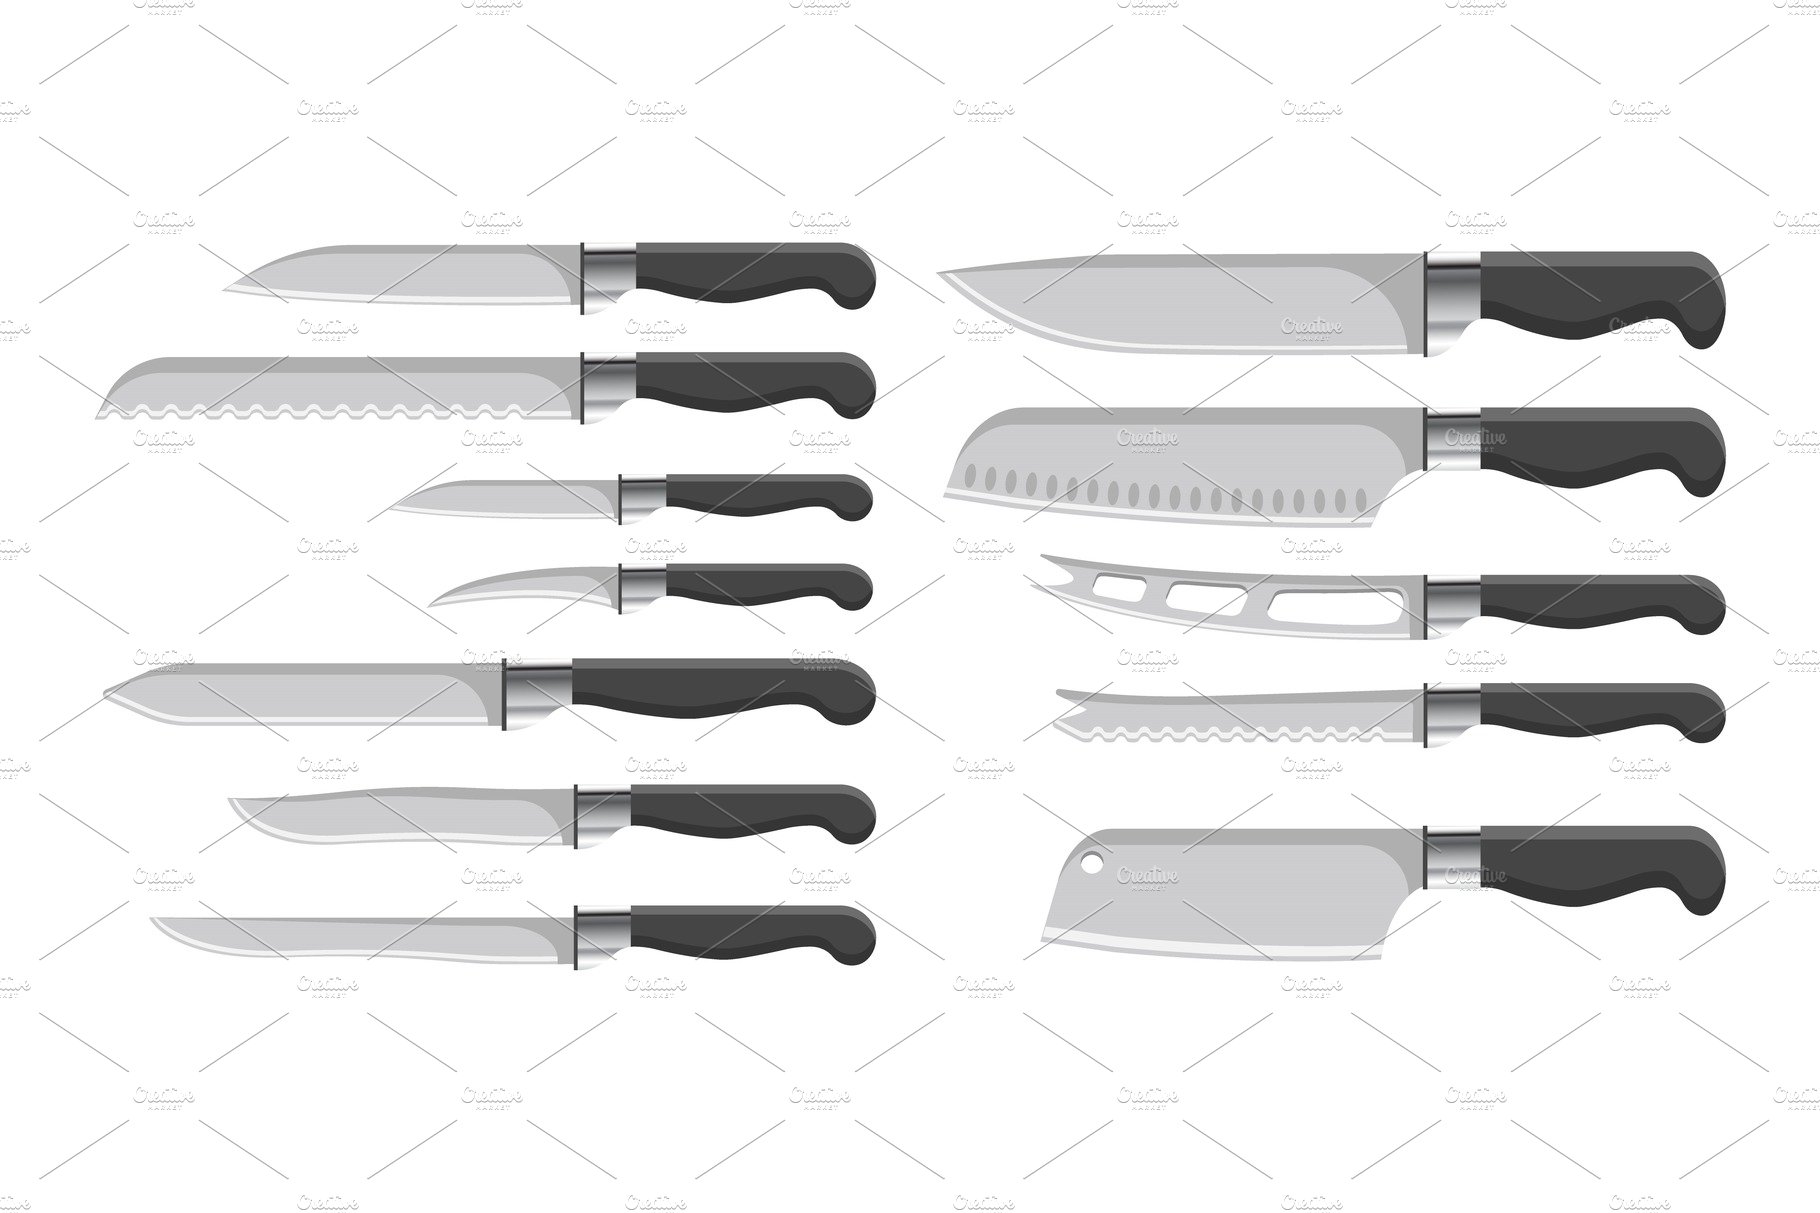 Knives Collection Kitchenware Vector Illustration cover image.